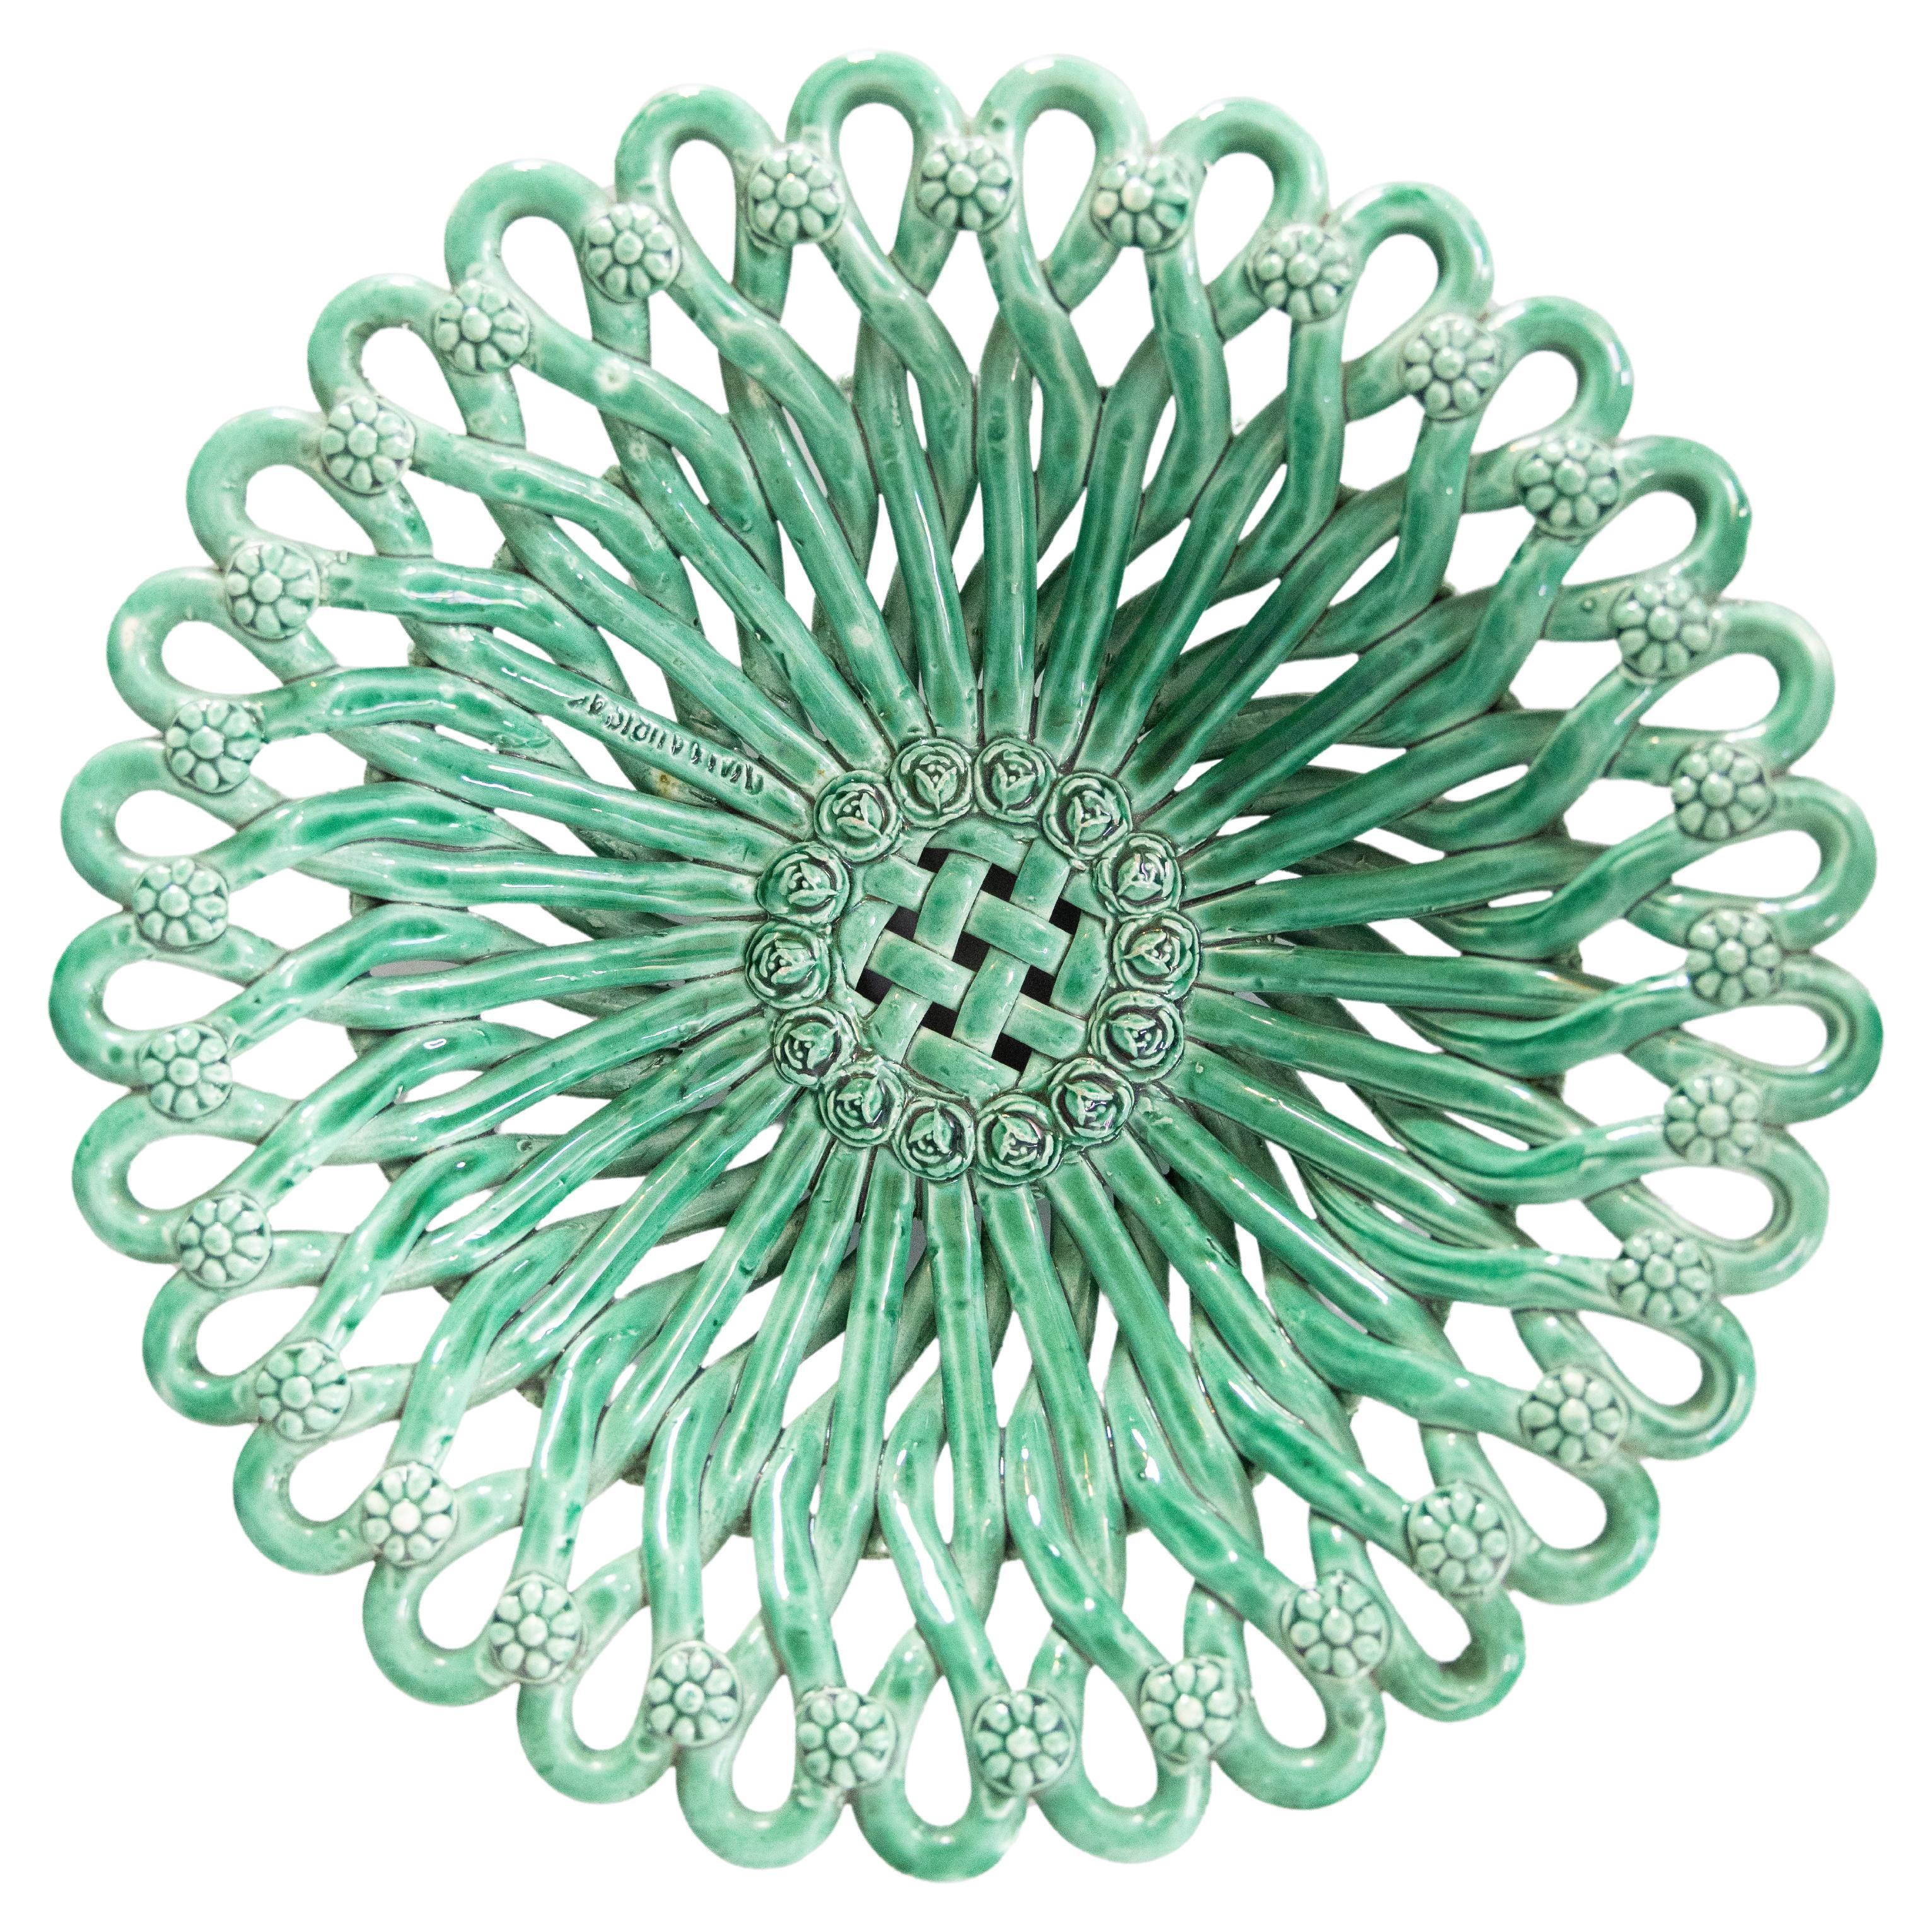 French Vallauris Majolica Emerald Green Reticulated Centerpiece Bowl, Circa 1940 For Sale